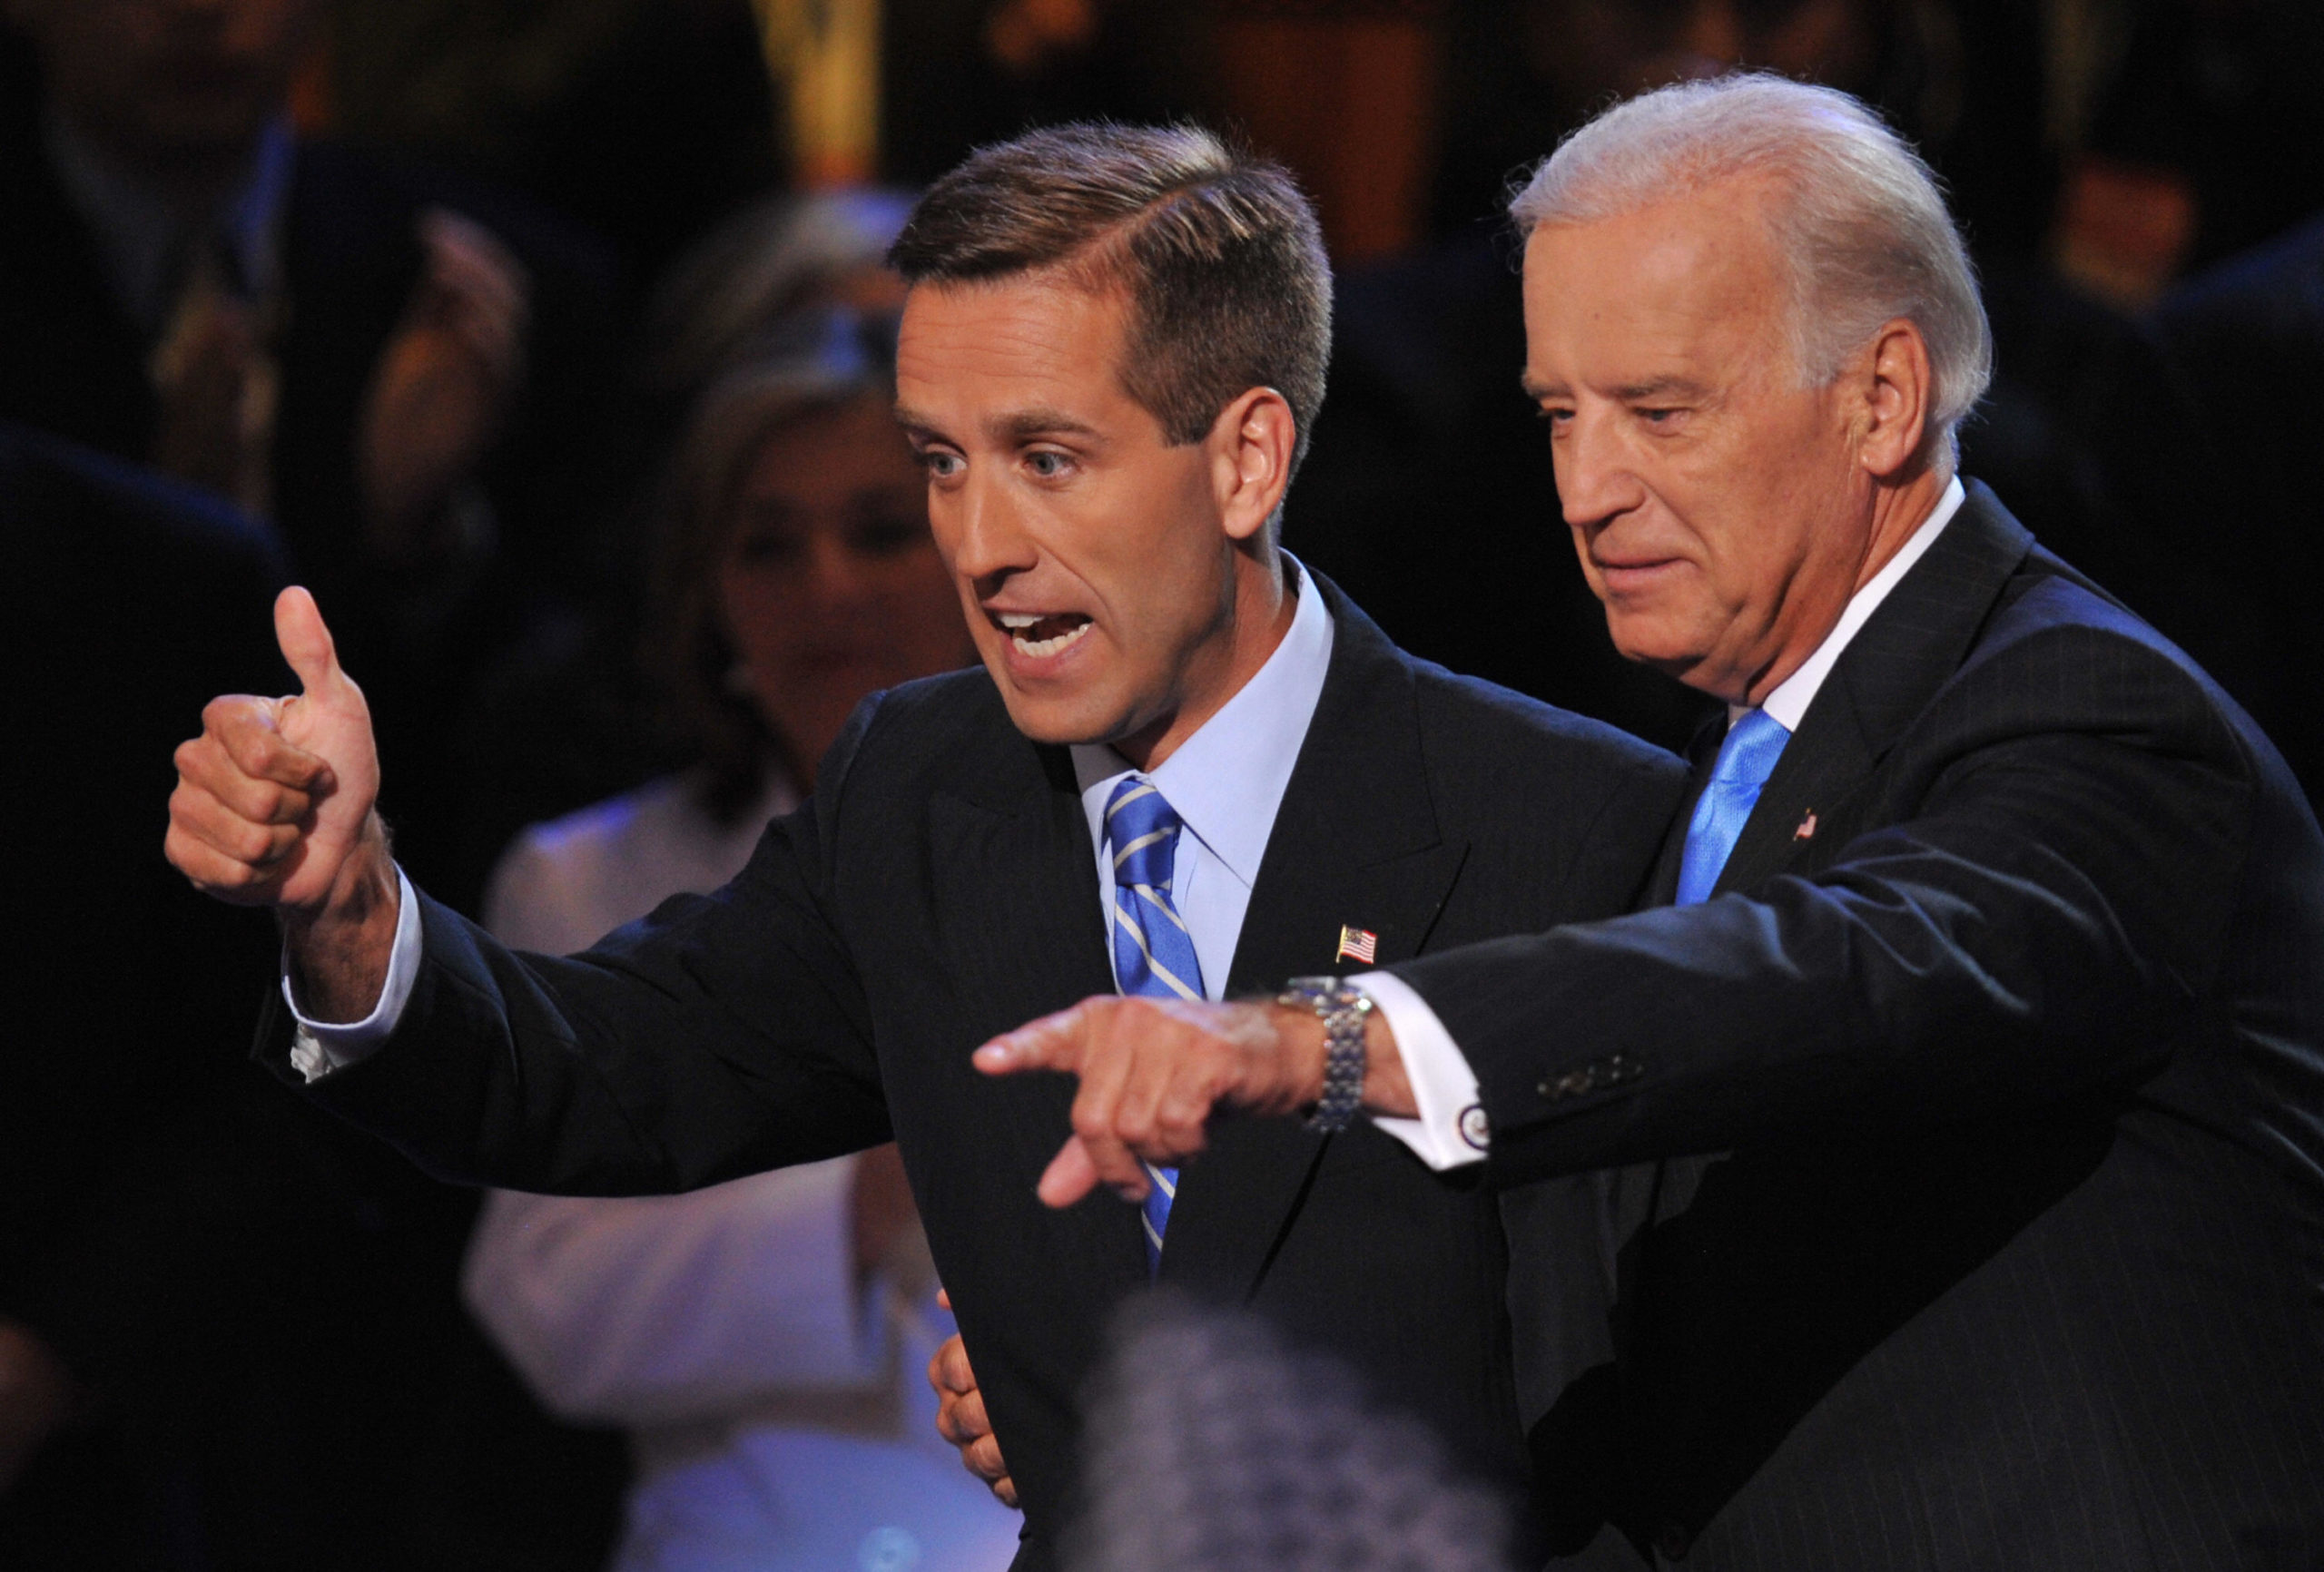 Democratic vice presidential nominee Joe Biden and his son Beau acknowledge the crowd during the Democratic National Convention August 27, 2008 at the Pepsi Center in Denver, Colorado. (PAUL J. RICHARDS/AFP via Getty Images)